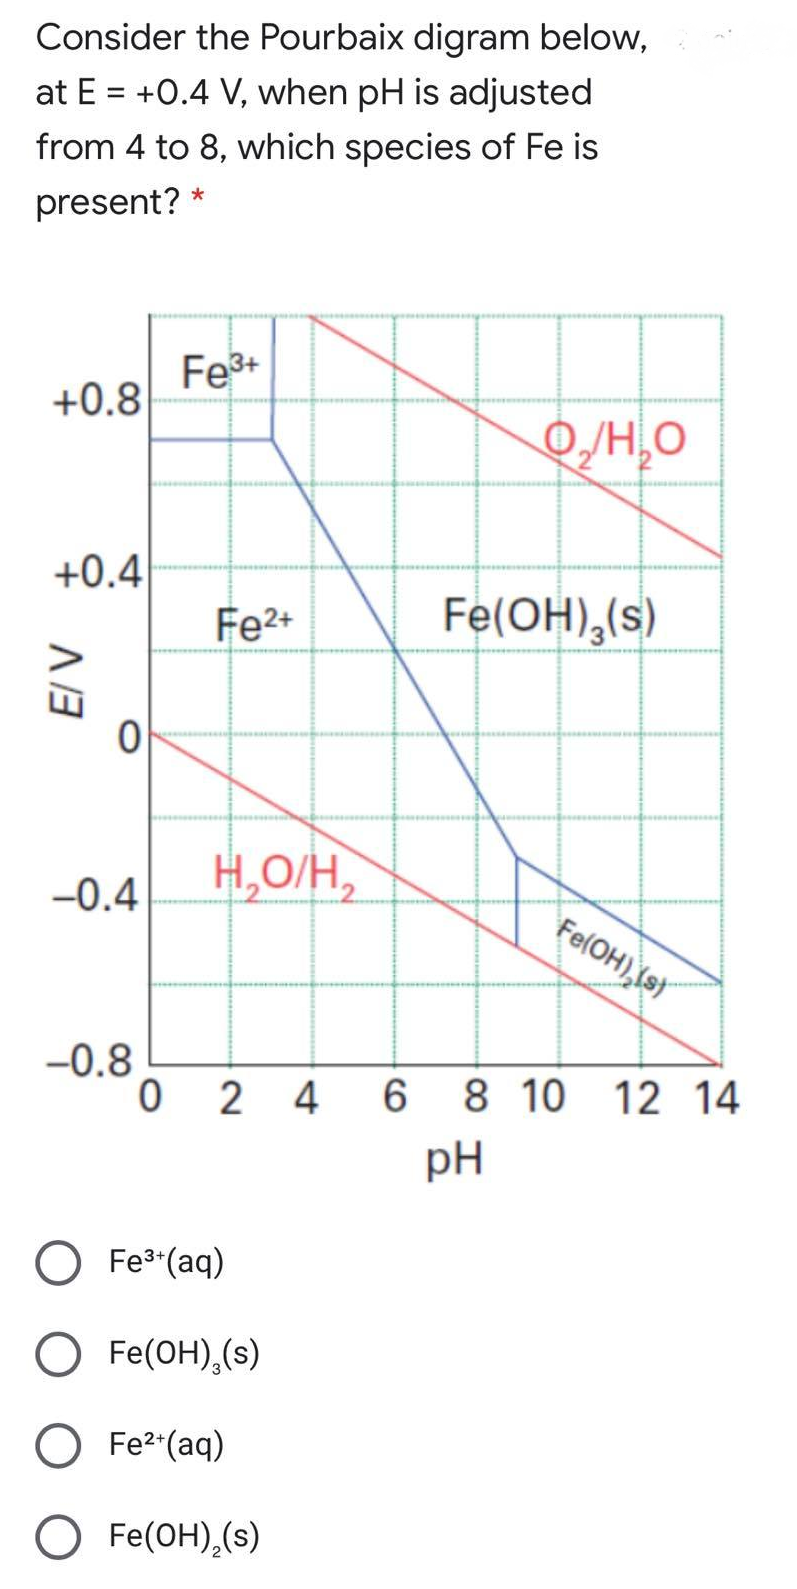 Consider the Pourbaix digram below,
at E = +0.4 V, when pH is adjusted
from 4 to 8, which species of Fe is
present? *
Fe+
+0.8
O,H,0
+0.4
Fe2+
Fe(OH),(s)
>
H,O/H,
-0.4
Fe(OH)s
--0.8
2 4
8 10 12 14
pH
O Fe* (aq)
O Fe(OH),(s)
Fe2 (aq)
O Fe(OH),(s)
